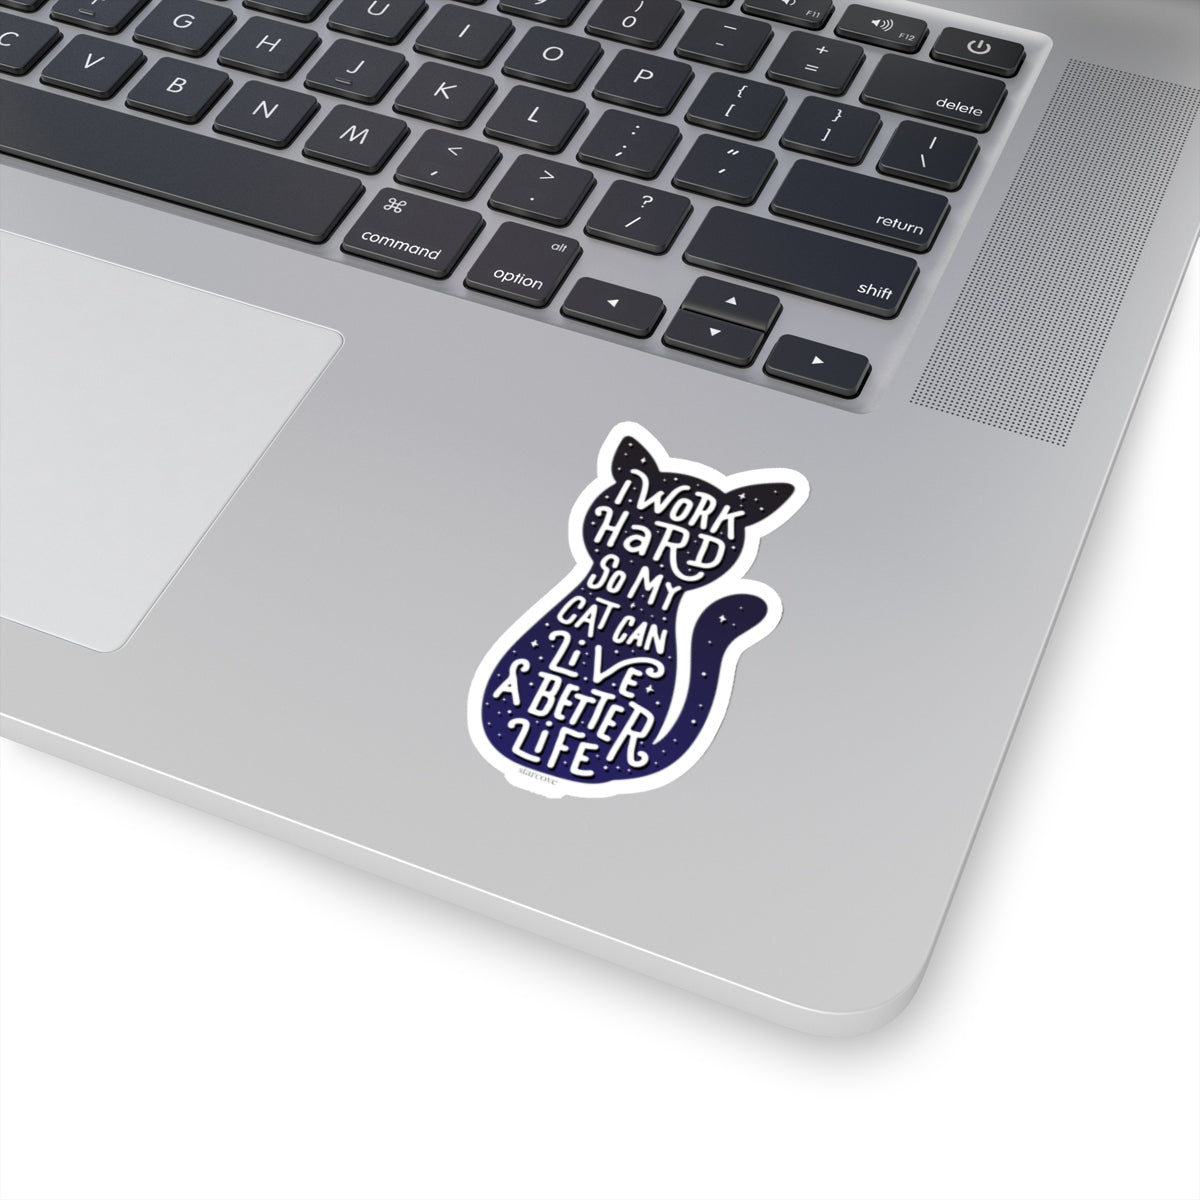 I Work Hard So My Cat Can Live a Better Life Decal, Stickers Laptop Vinyl Cute Water bottle Tumbler Car Bumper Aesthetic Label Wall Starcove Fashion